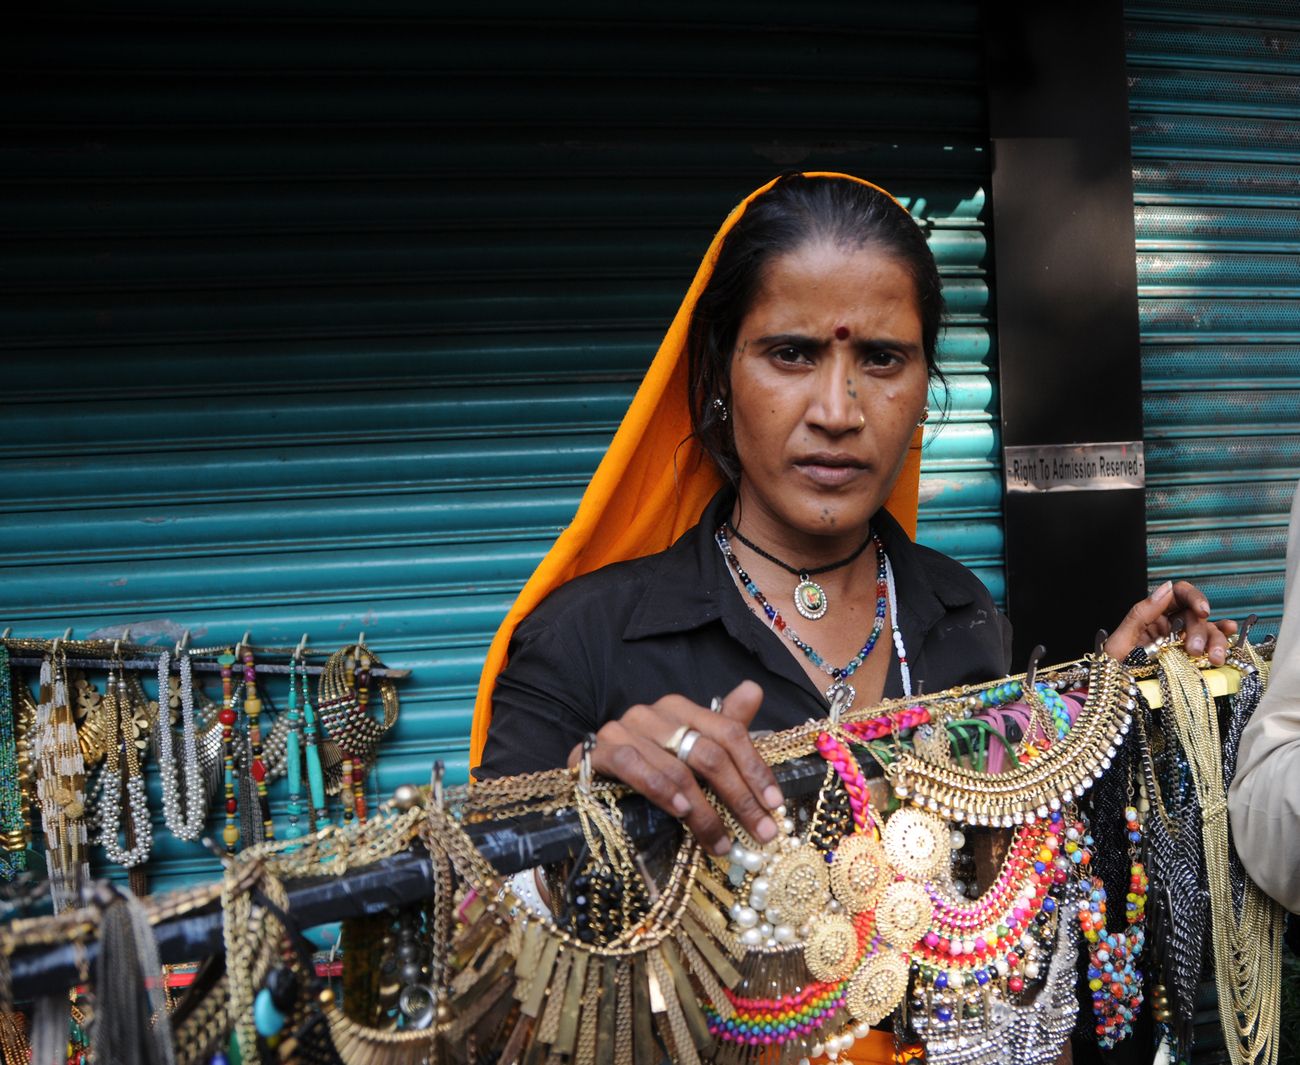 A woman sells gorgeous artificial jewellery such as necklaces, earrings et al. The annual Kala Ghoda Arts Festival is the most popular cultural festival and is well liked for its edgy installations, performances and discussions